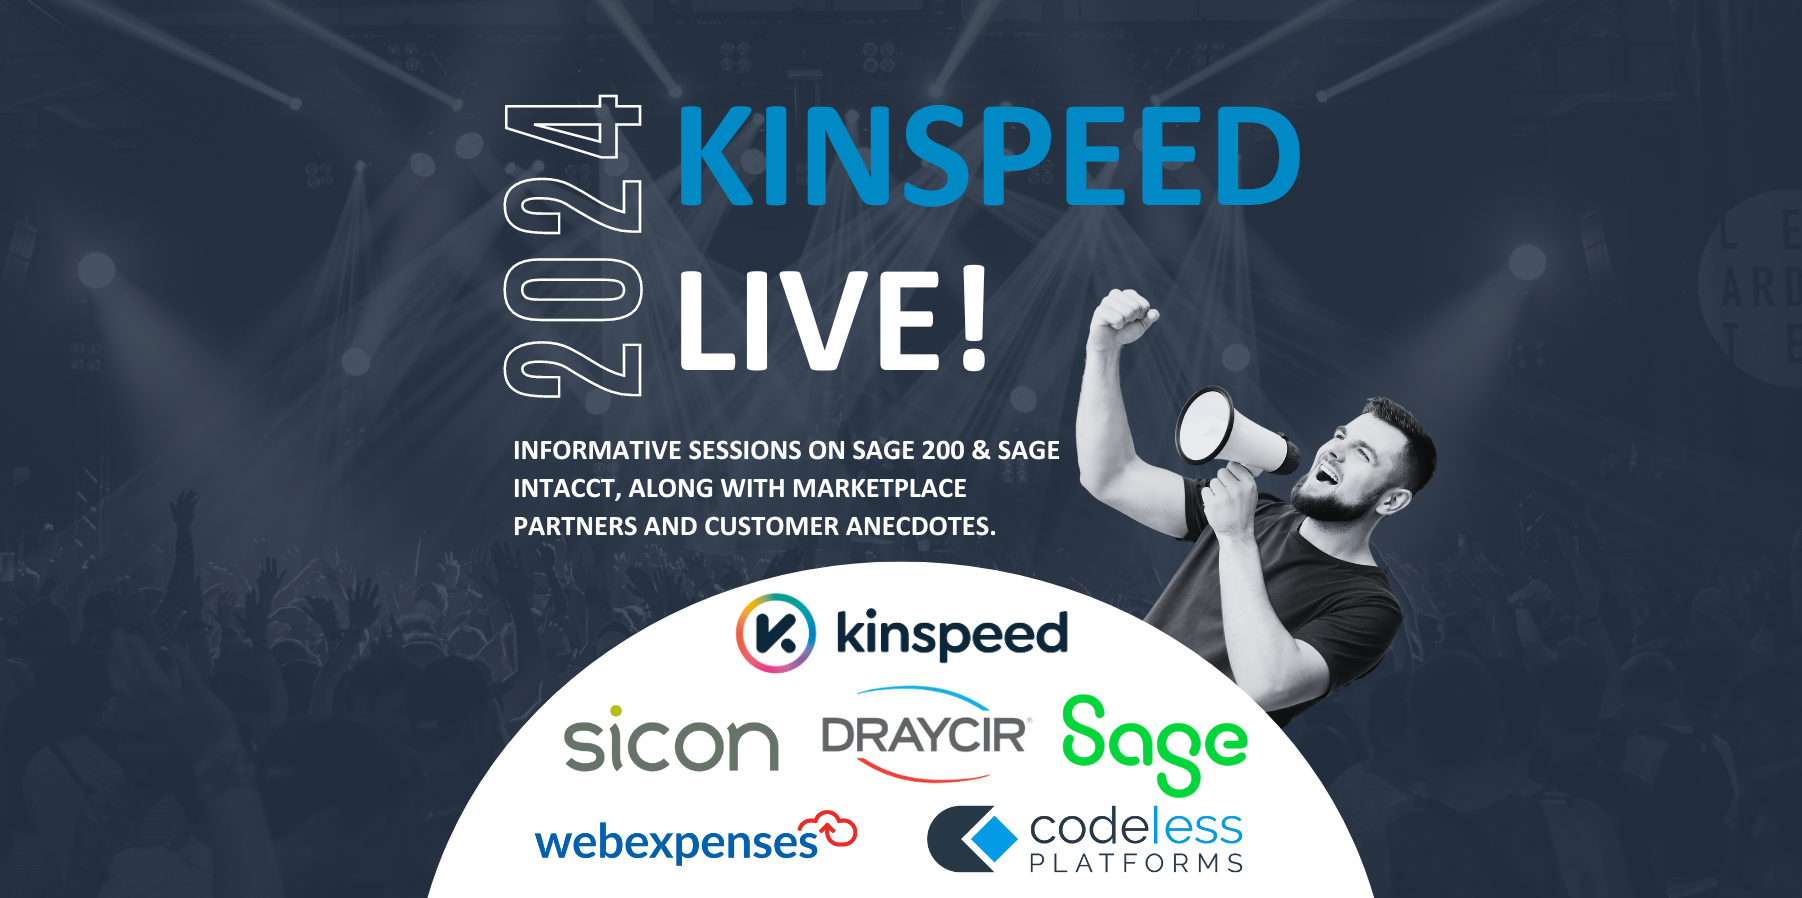 Exciting News! Kinspeed Live Event Coming Soon! April 18, 2024 at the CASA Hotel, Chesterfield from 9am to 3:30pm